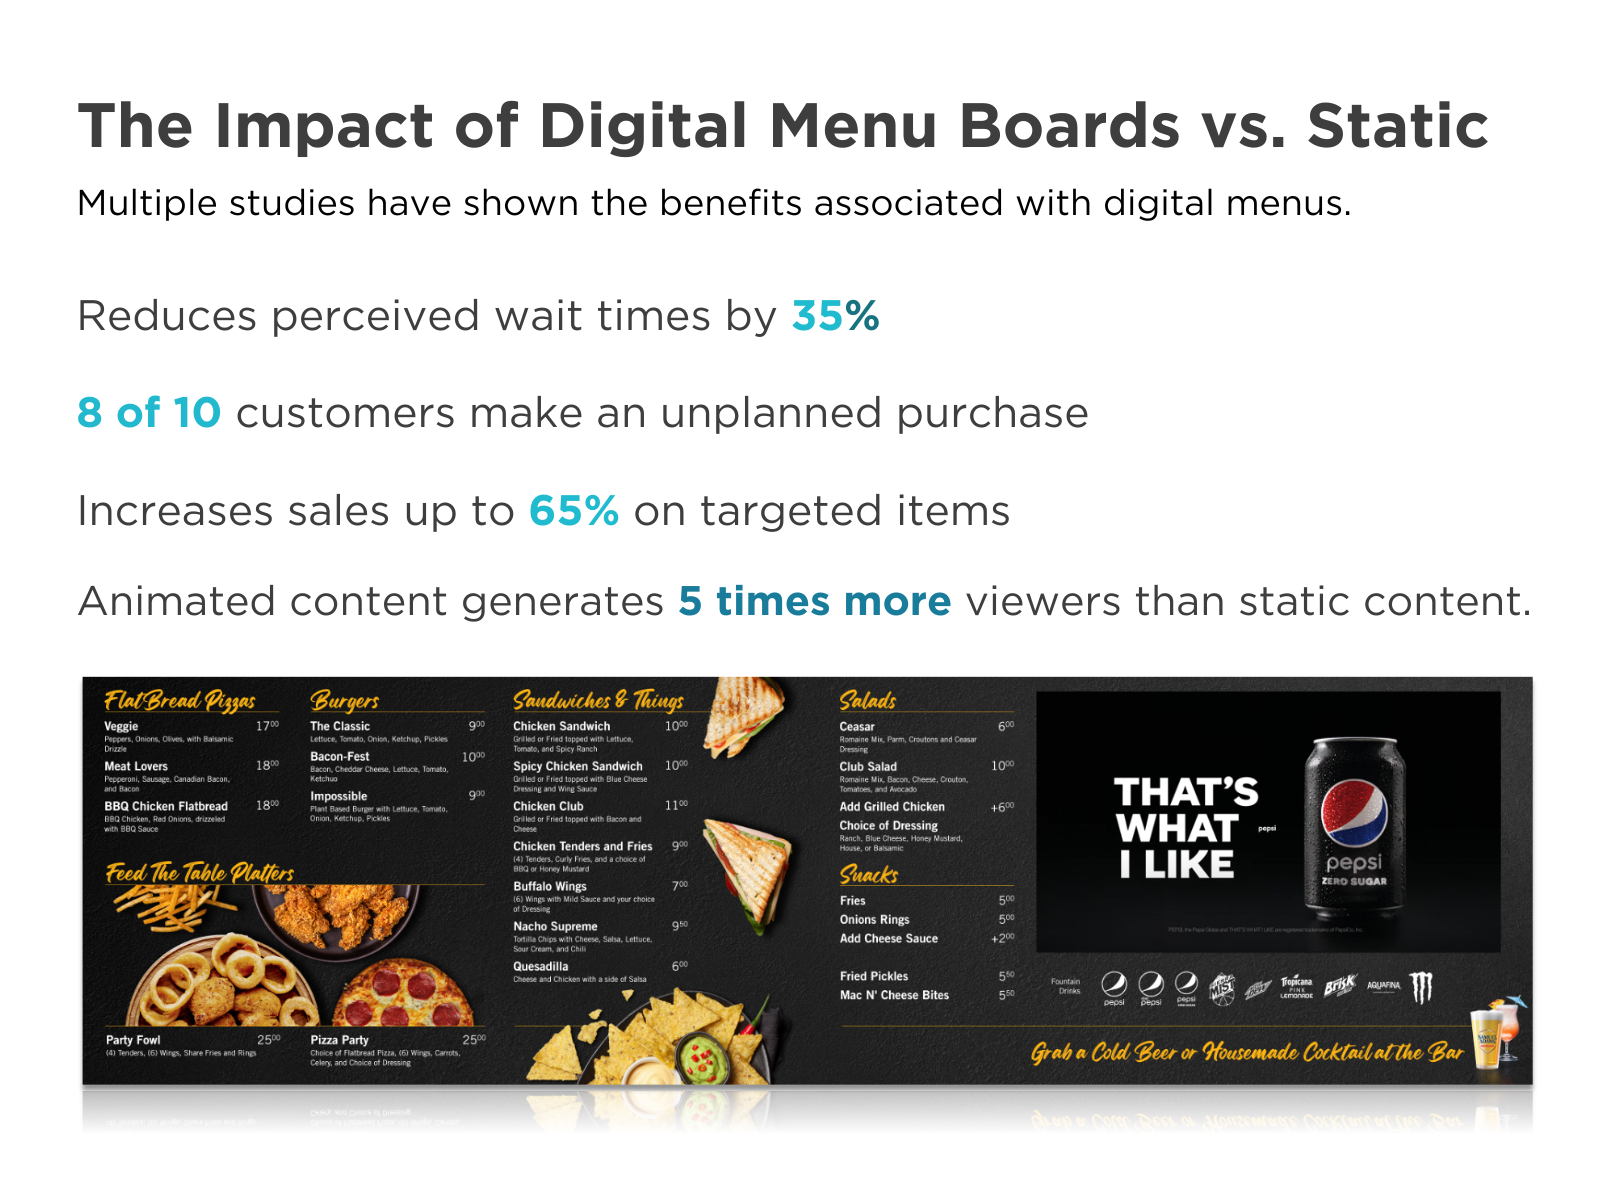 Image says "the impact of digital menu boards vs static: multiple studies have shown the benefits associated with digital menus. Reduces perceived wait times by 35%. 8 of 10 customers make an unplanned purchase. Increased sales up to 65% on targeted items. Animated content generates 5 times more viewers than static content." Image of menu board